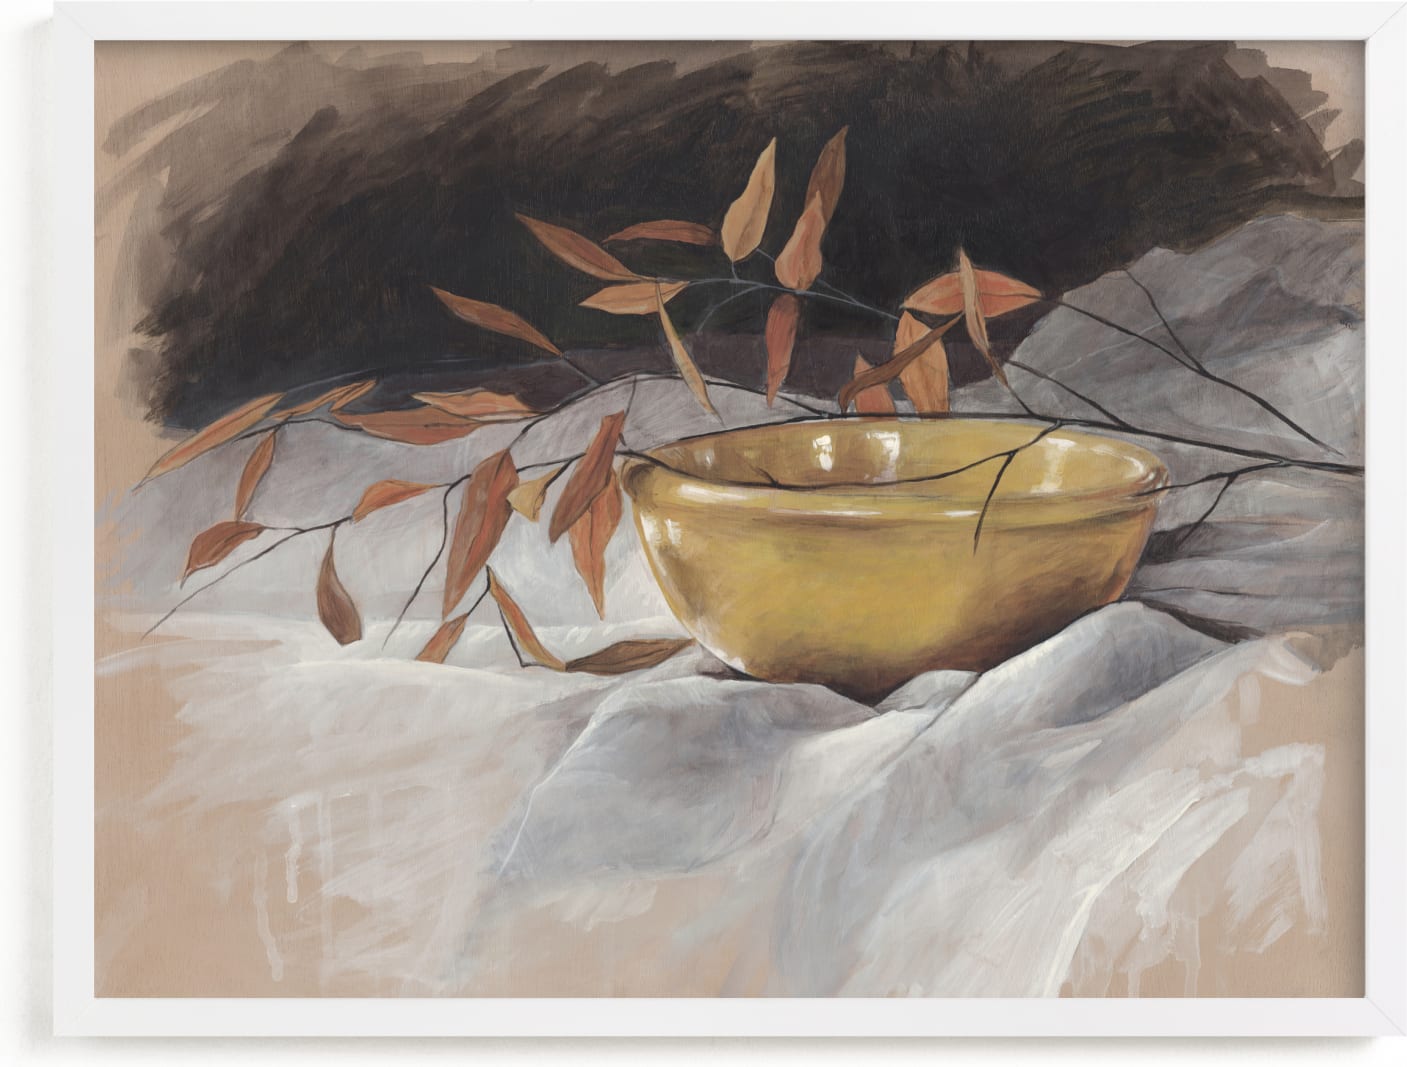 This is a brown, yellow, orange art by Lorent and Leif called Yellow Bowl.